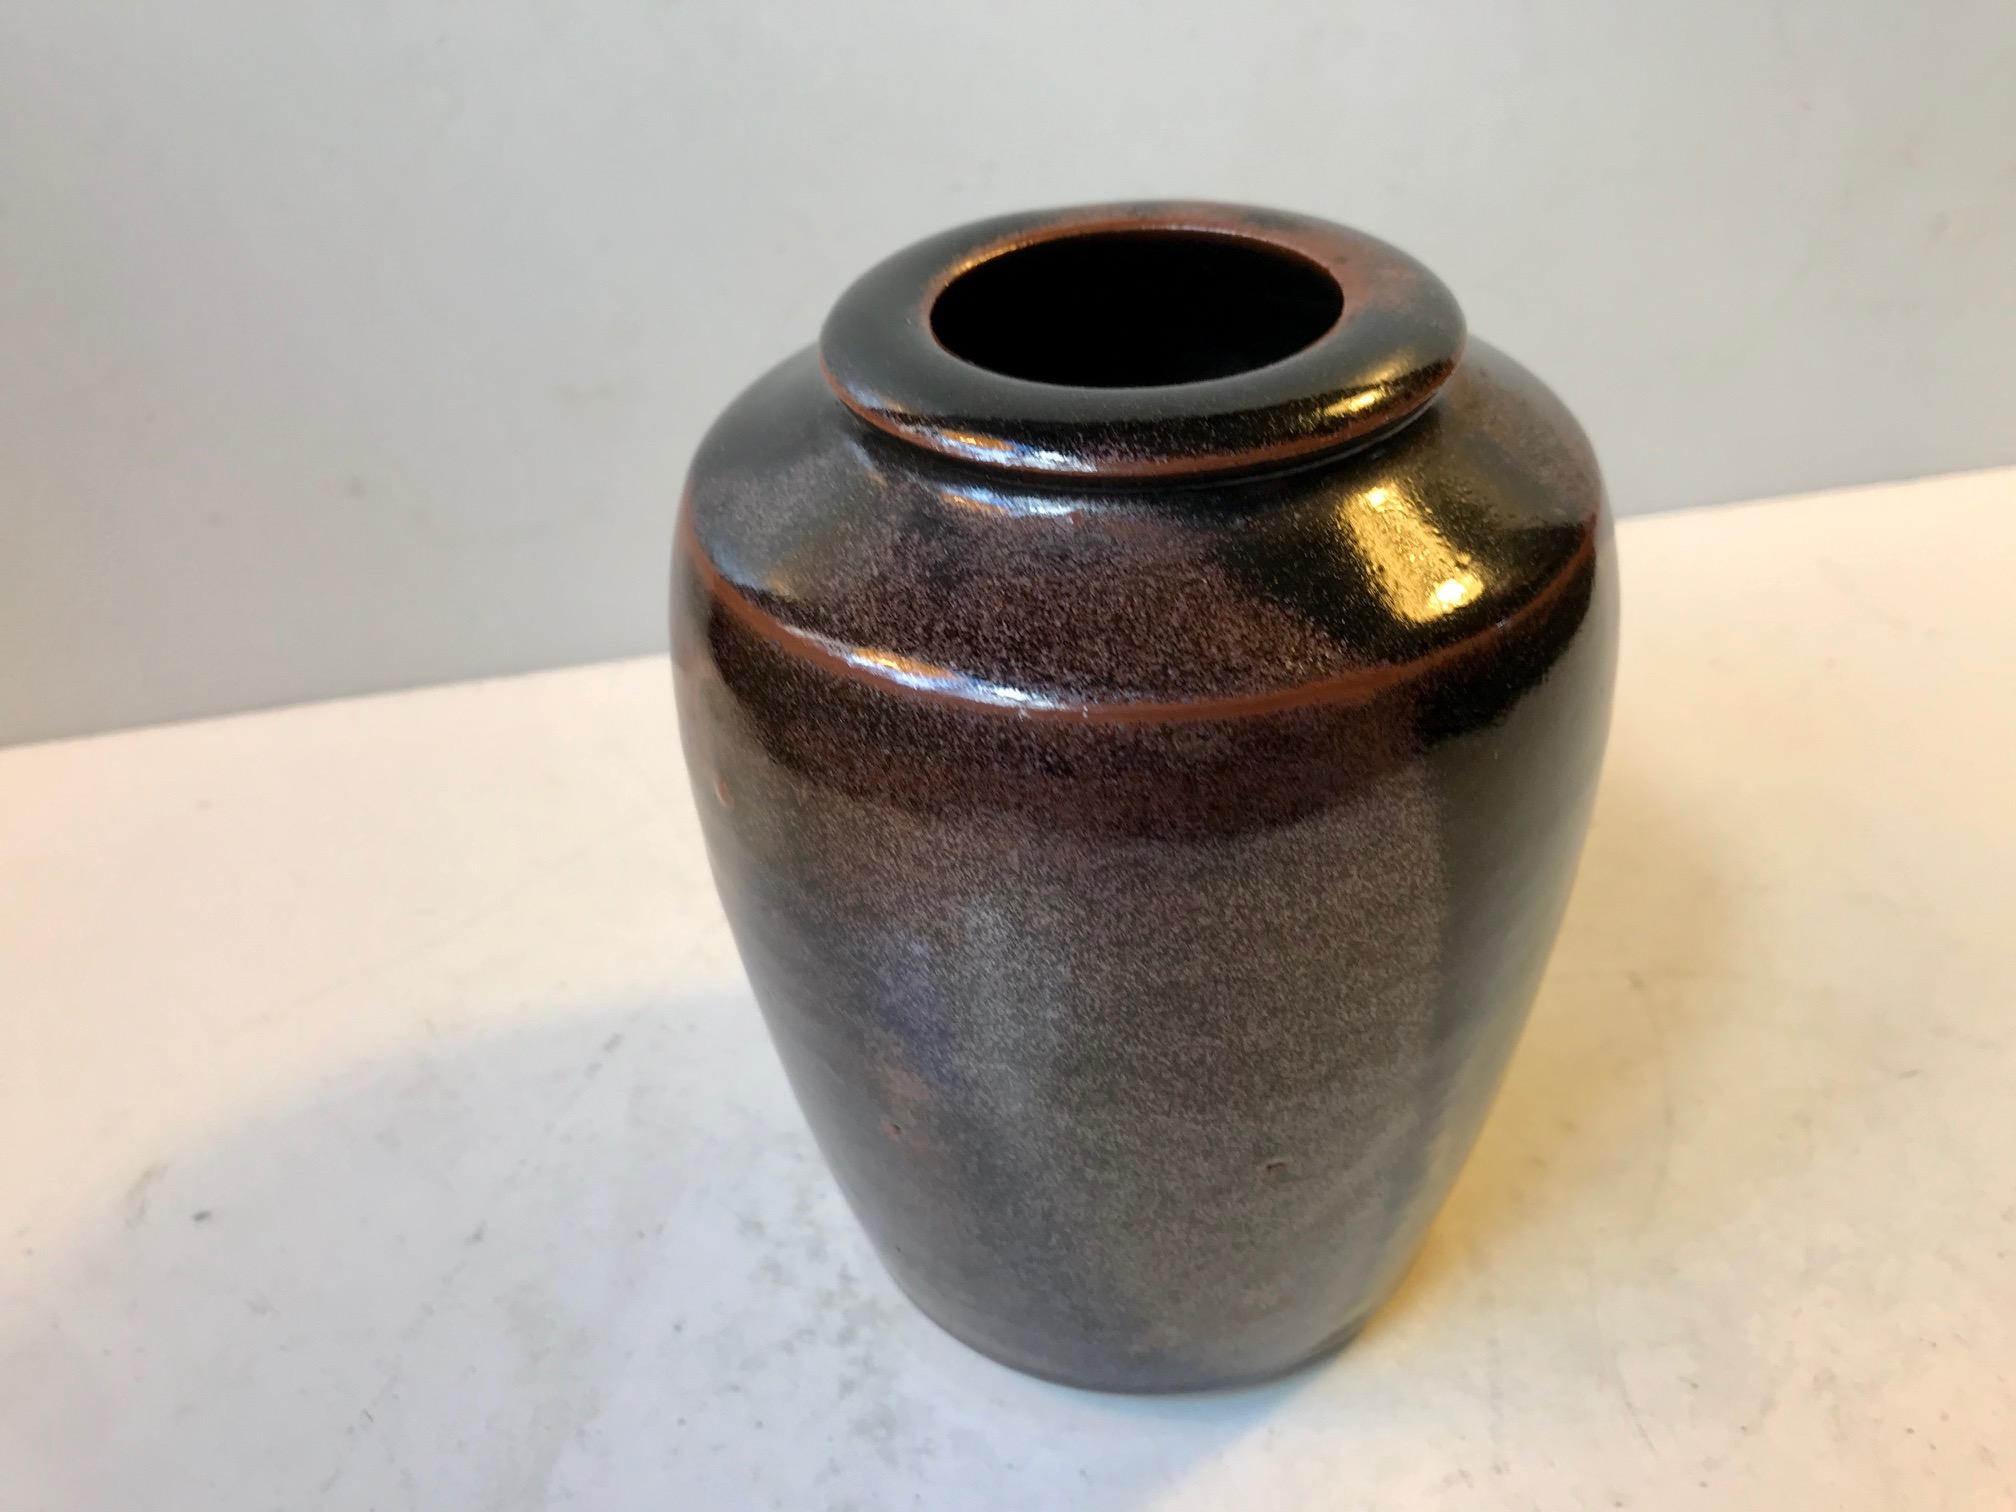 Unique Studio vase from the hands of Danish ceramist Merethe Bloch. It dates from the latter part of the 1970s and is executed in stoneware and decorated in earthy/metallic tenmoku glazes. It is signed by hand to its base: MB.